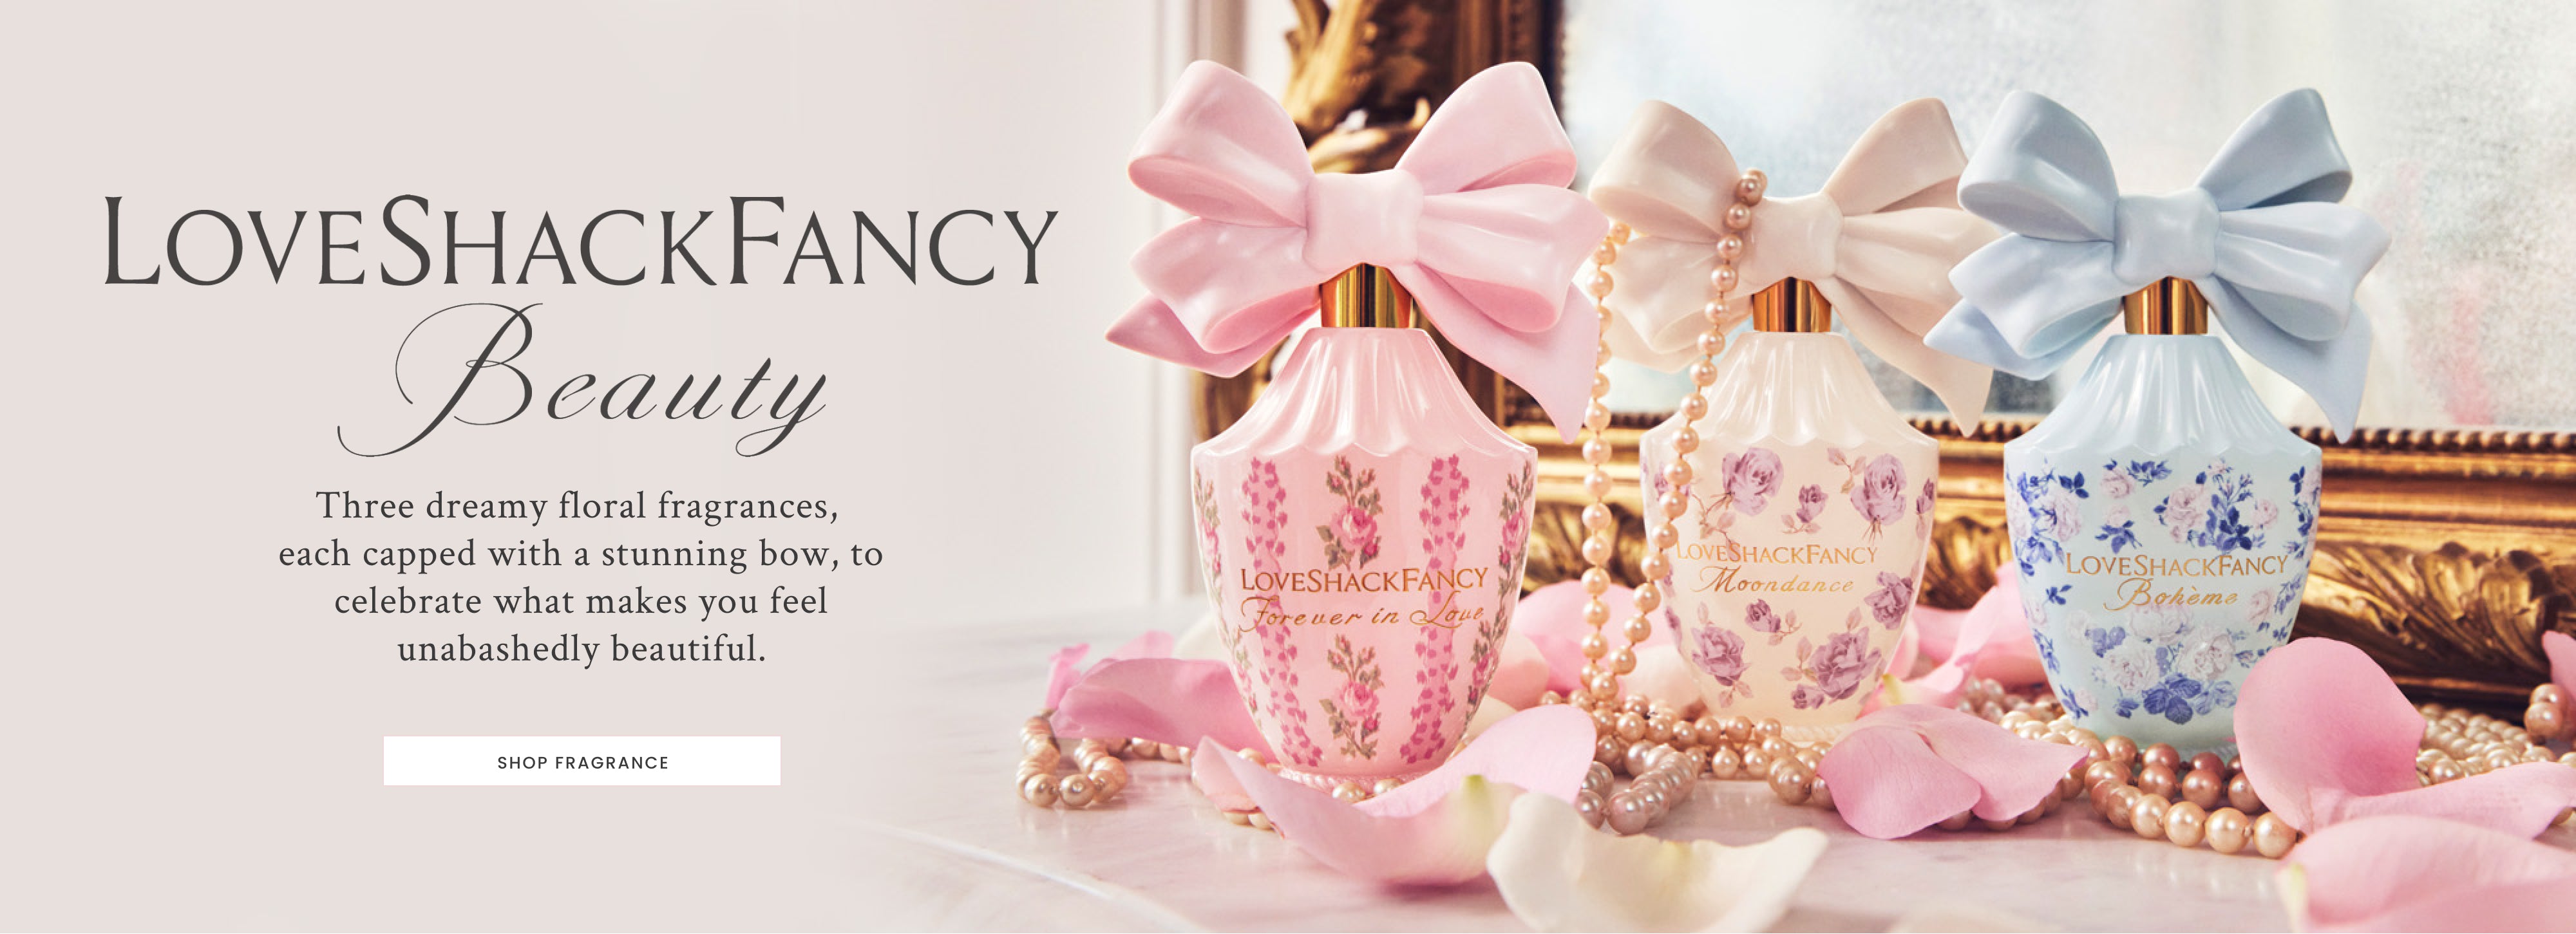 Three dreamy floral fragrances, each capped with a stunning bow, to celebrate what makes you feel unabashedly beautiful.